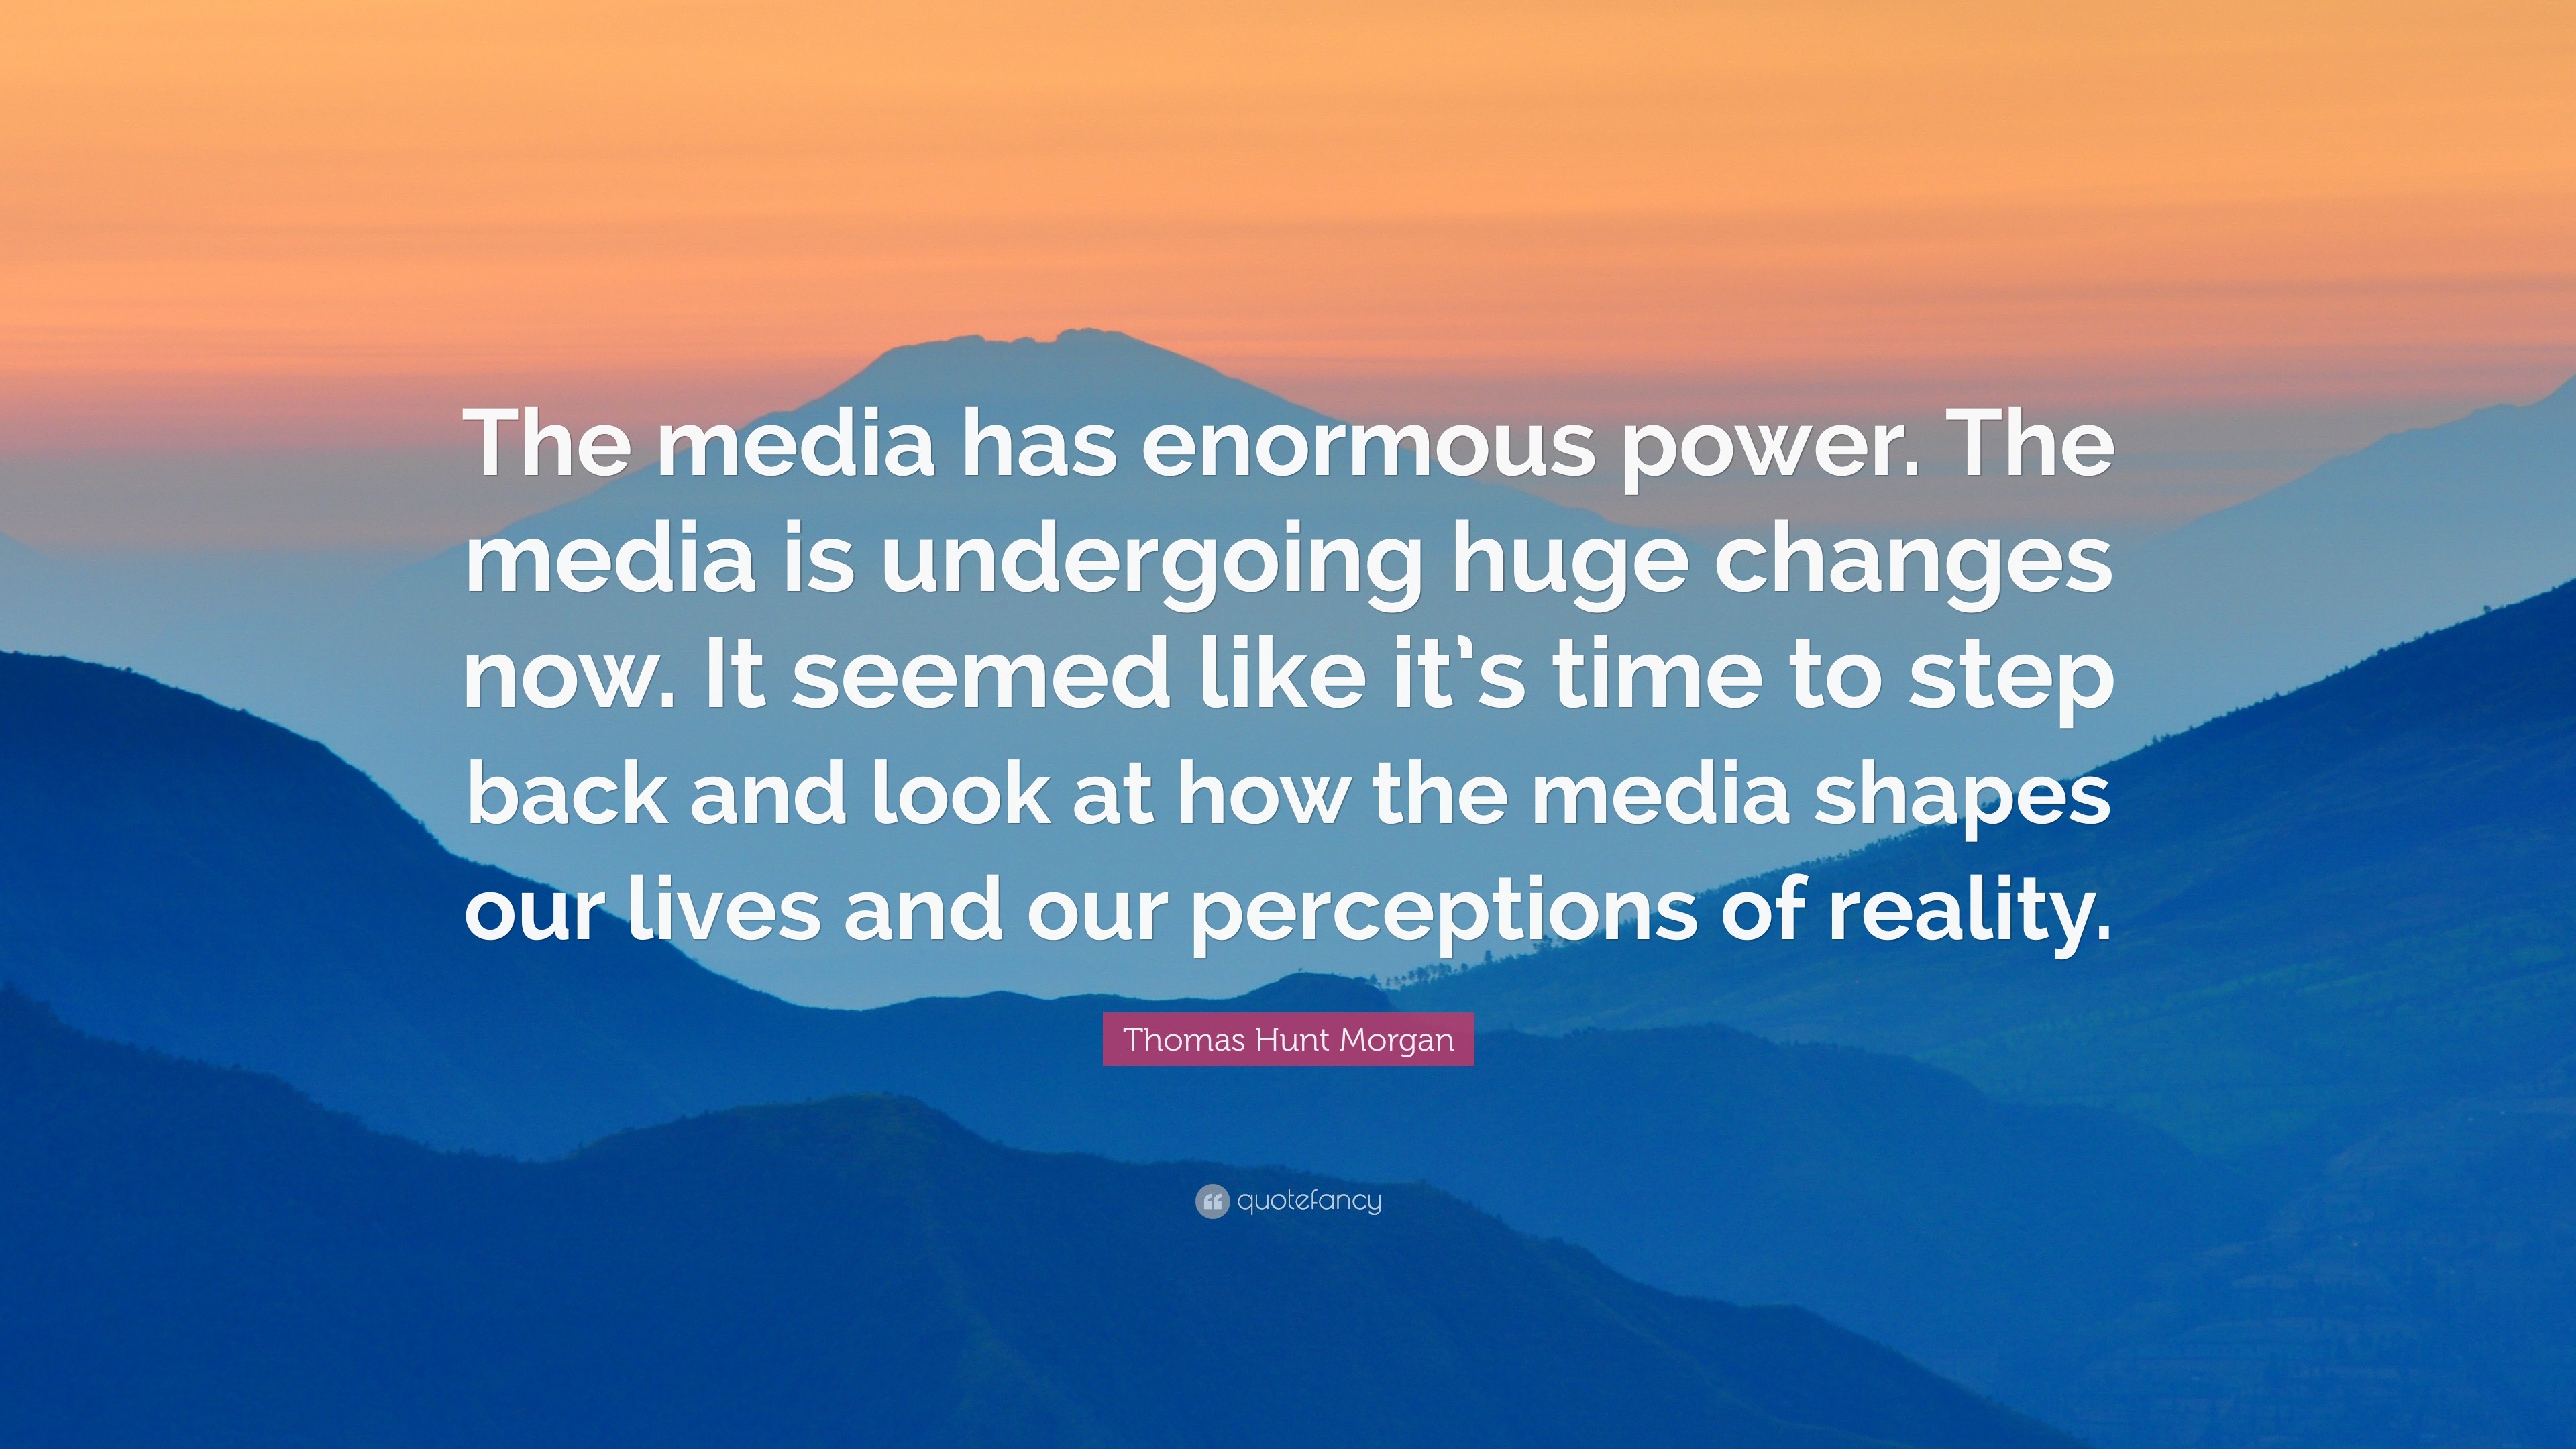 Thomas Hunt Morgan Quote: “The media has enormous power. The media is ...